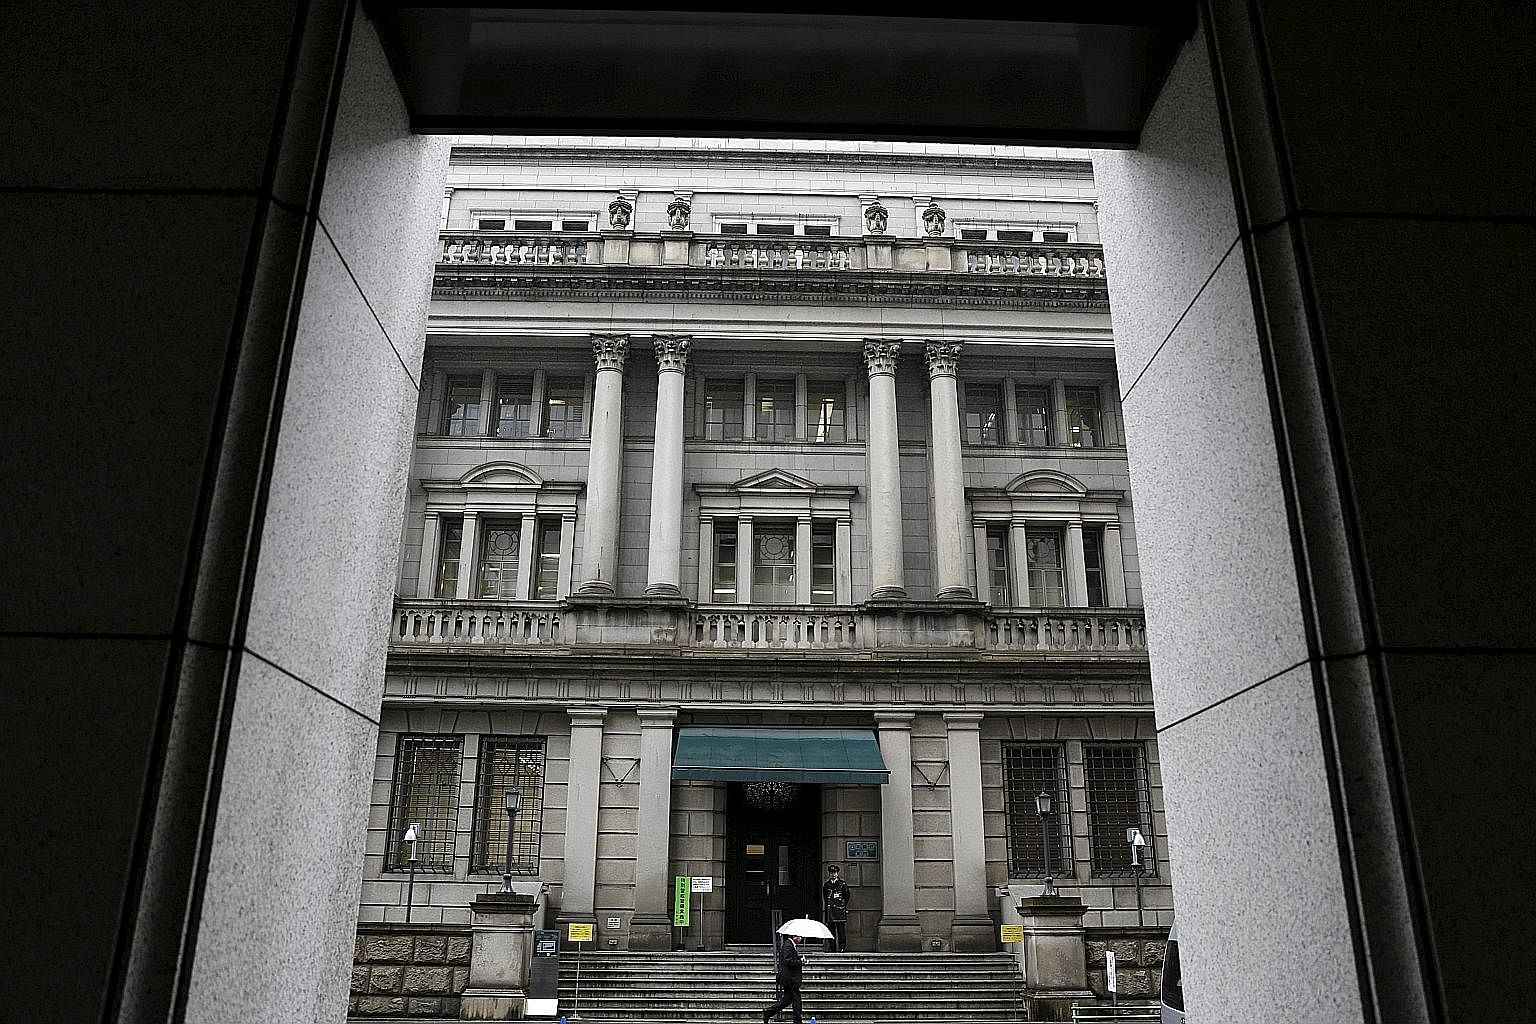 The Bank of Japan's headquarters in Tokyo. It is too early to assess if negative interest rates will work well for economies like Japan and the European Union.